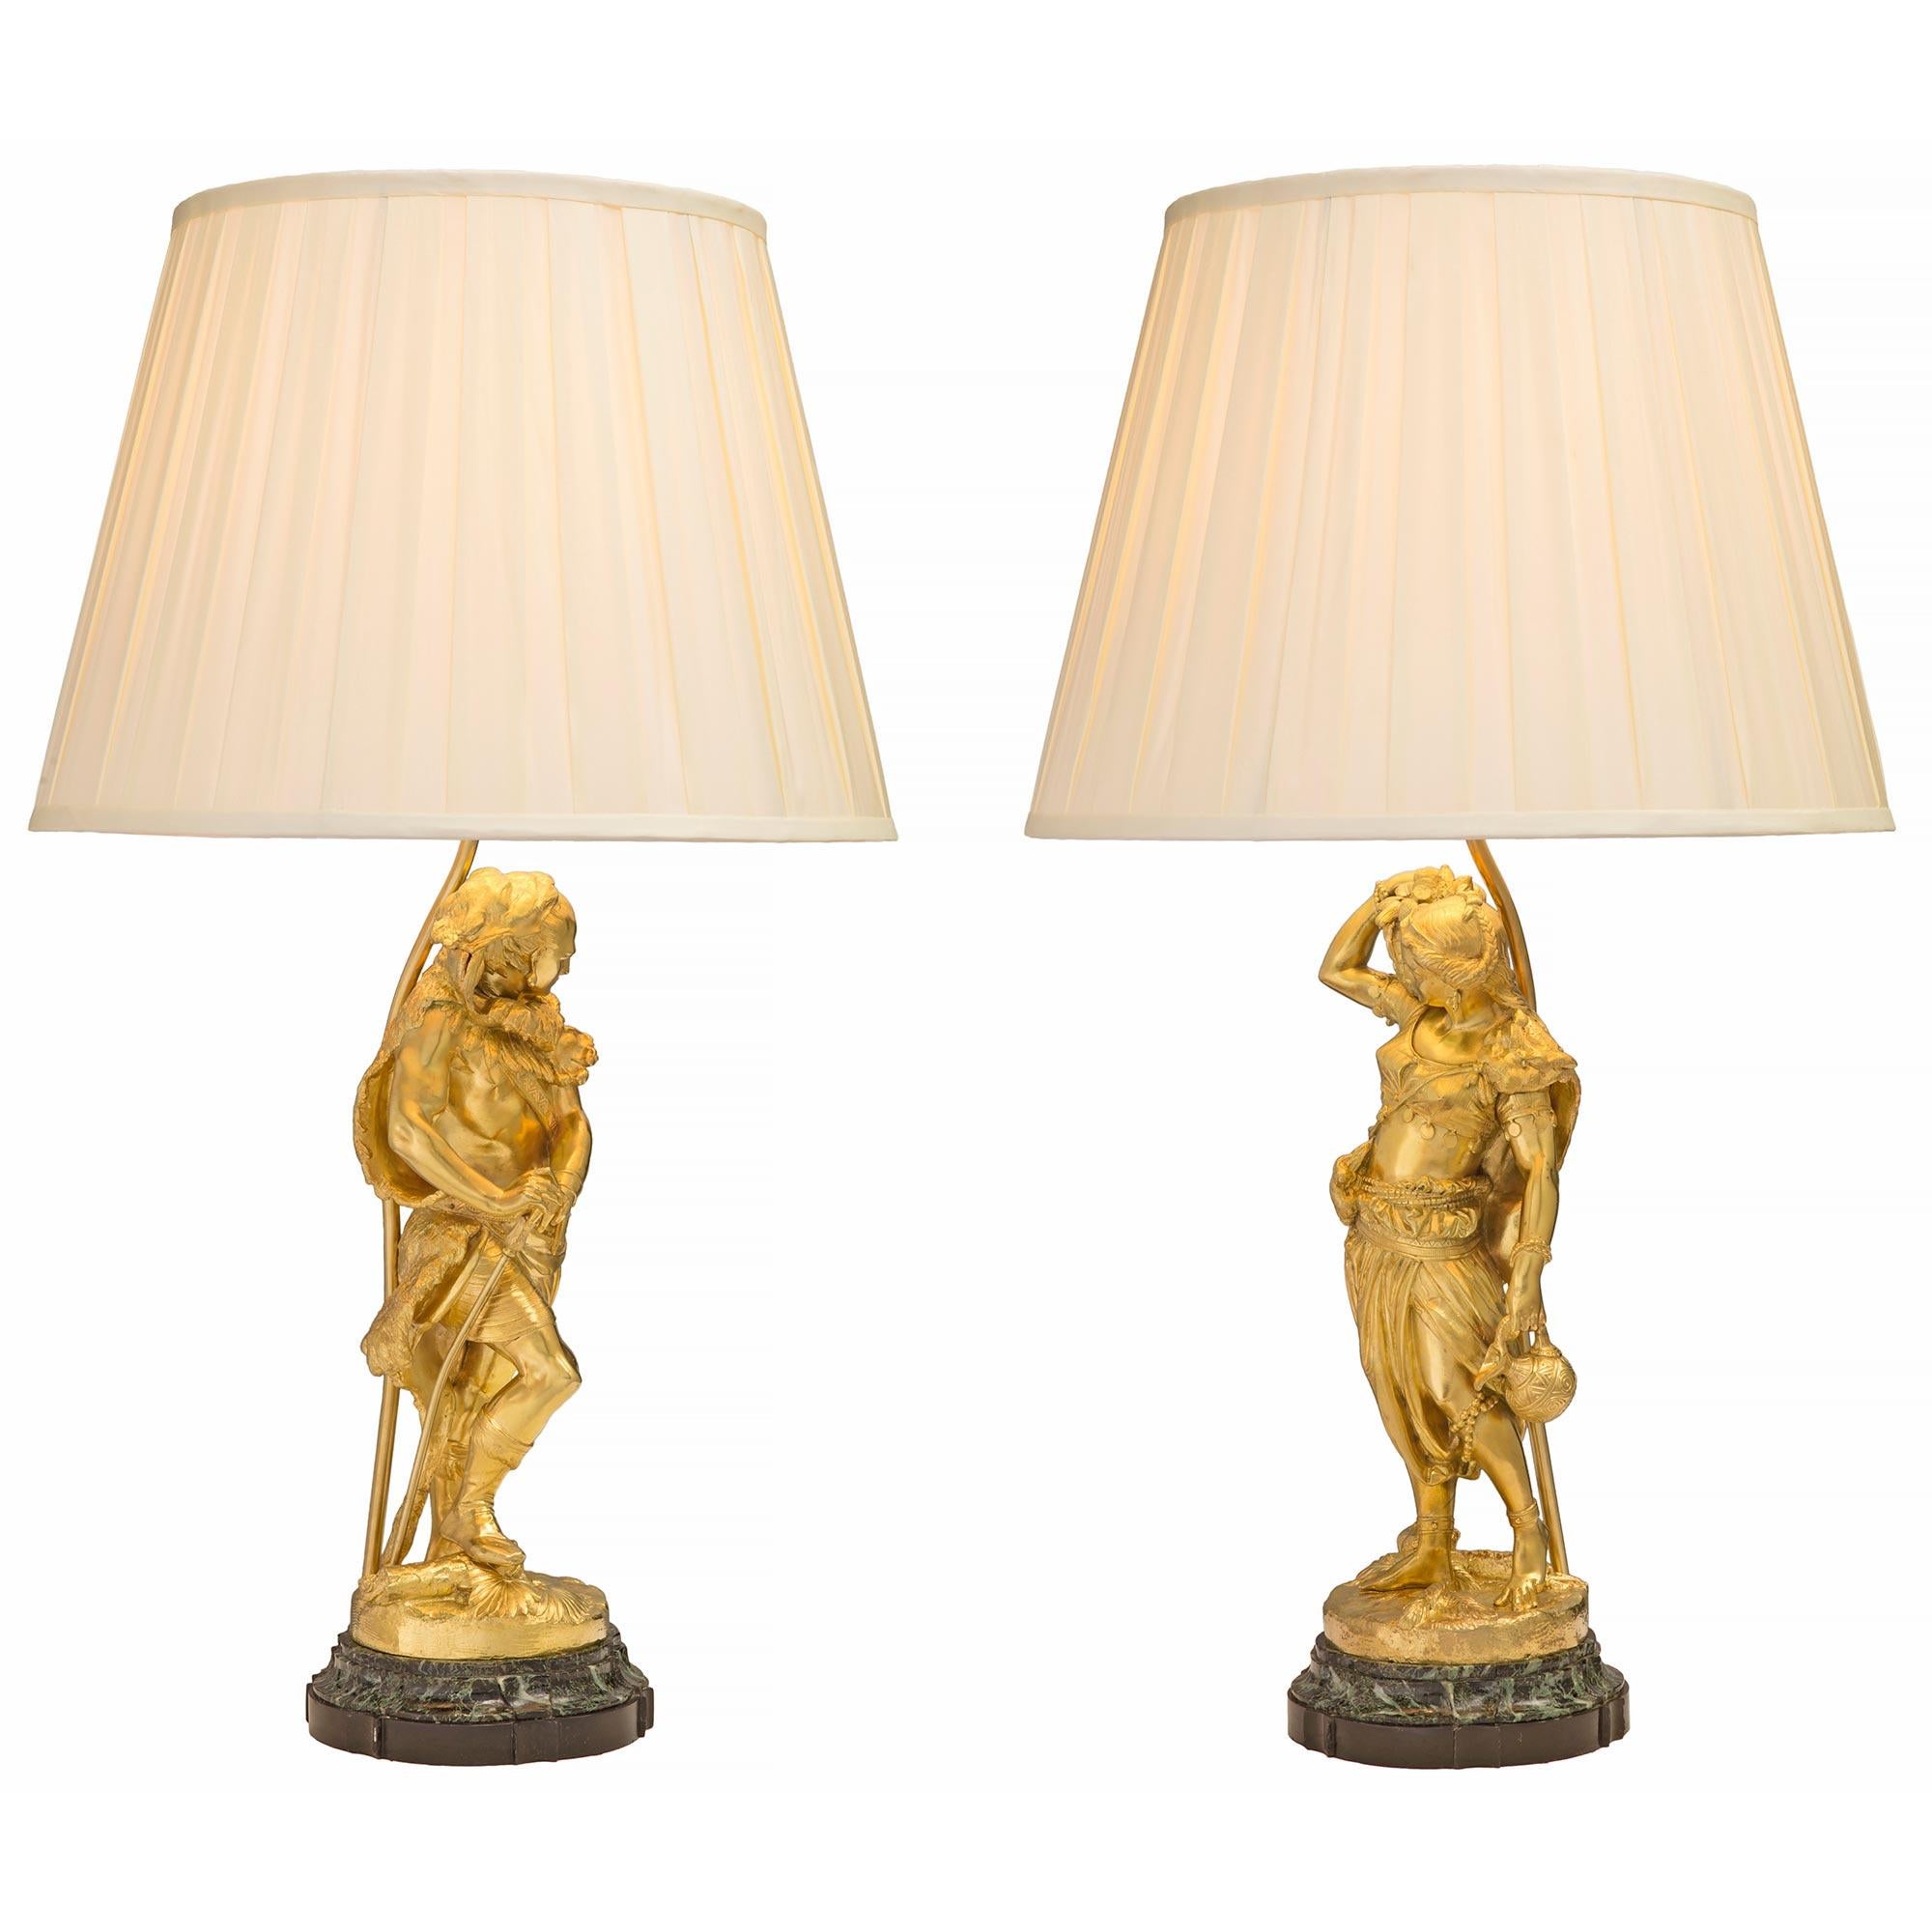 A stunning and high quality true pair of French 19th century Louis XVI st. Belle Époque period ormolu and Vert de Patricia marble statues mounted into lamps. Each lamp is raised by a most uniquely mottled and scalloped patinated bronze and Vert de